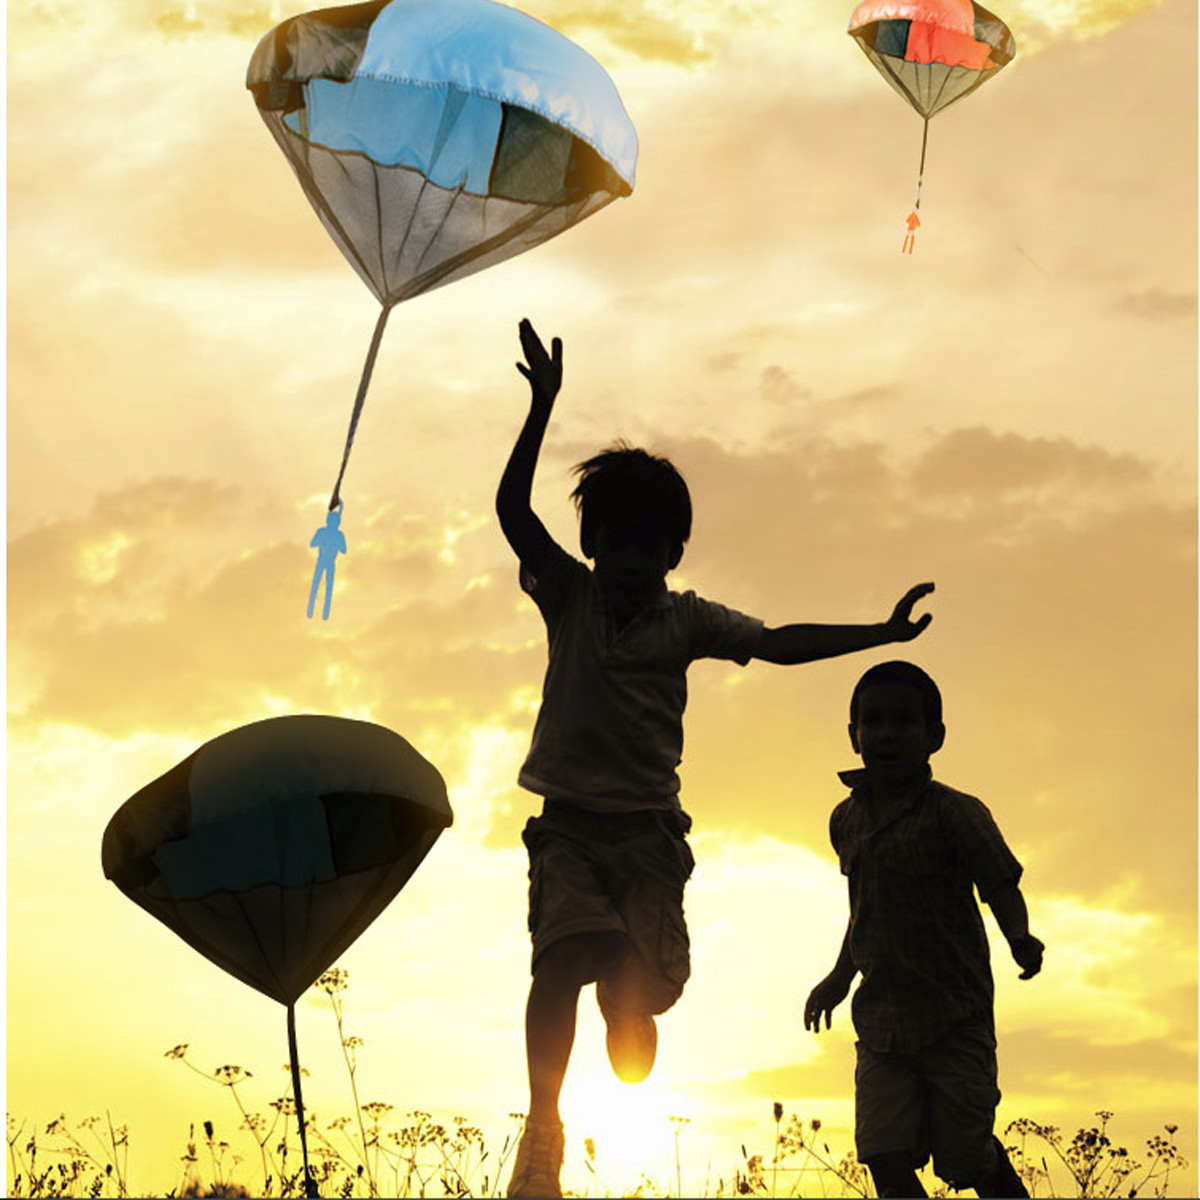 Kids-Hand-Throwing-Parachute-Kite-Outdoor-Play-Game-Toy-1021887-1